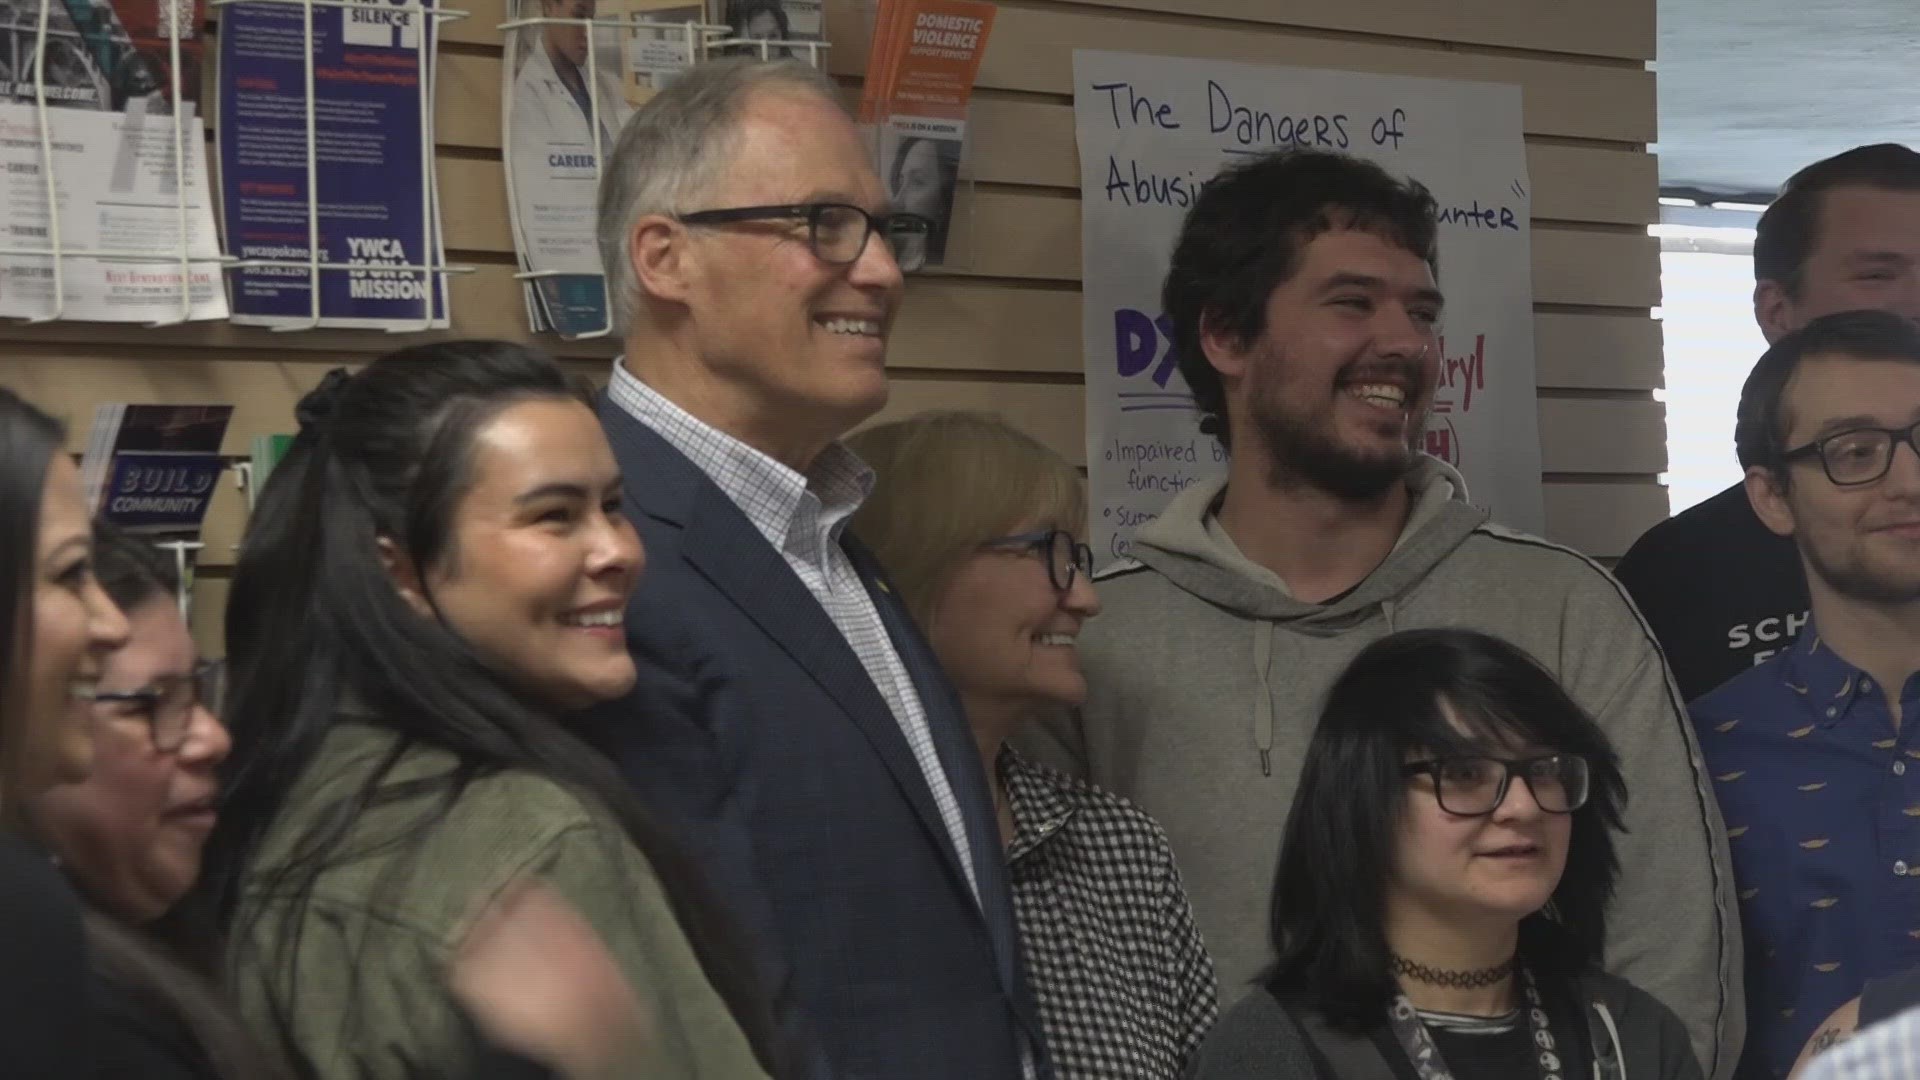 Washington Governor Jay Inslee came to Spokane to talk about youth homelessness. He met with Volunteers of America about state funding to build a new shelter.